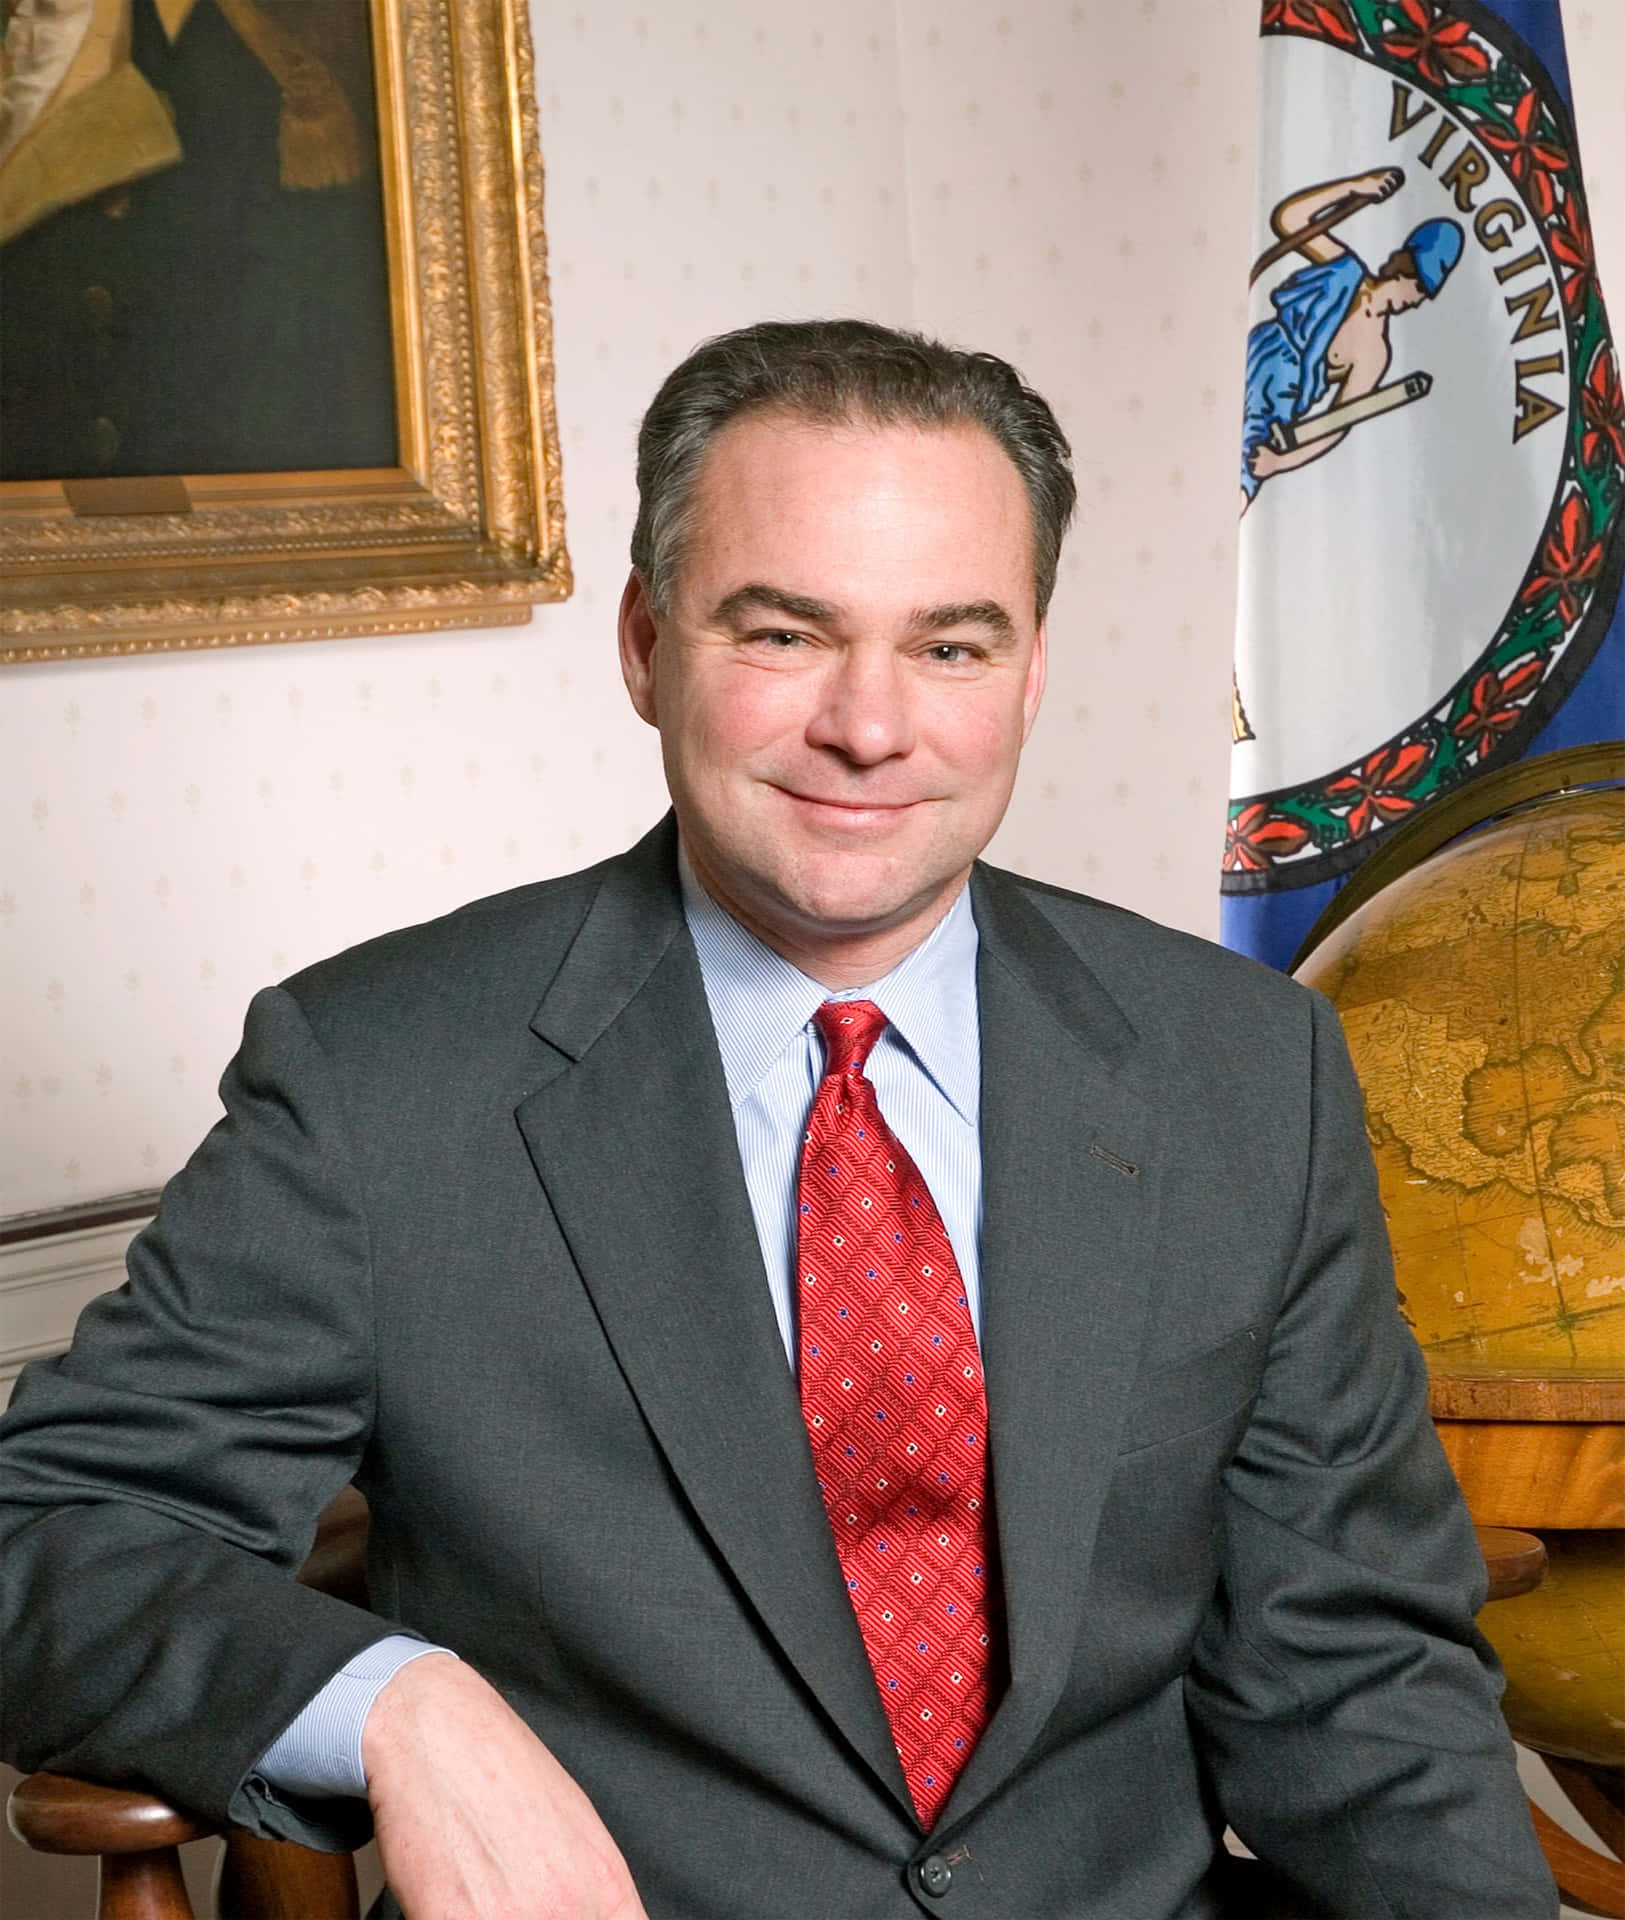 Tim Kaine With Virginia Flag And Seal Wallpaper